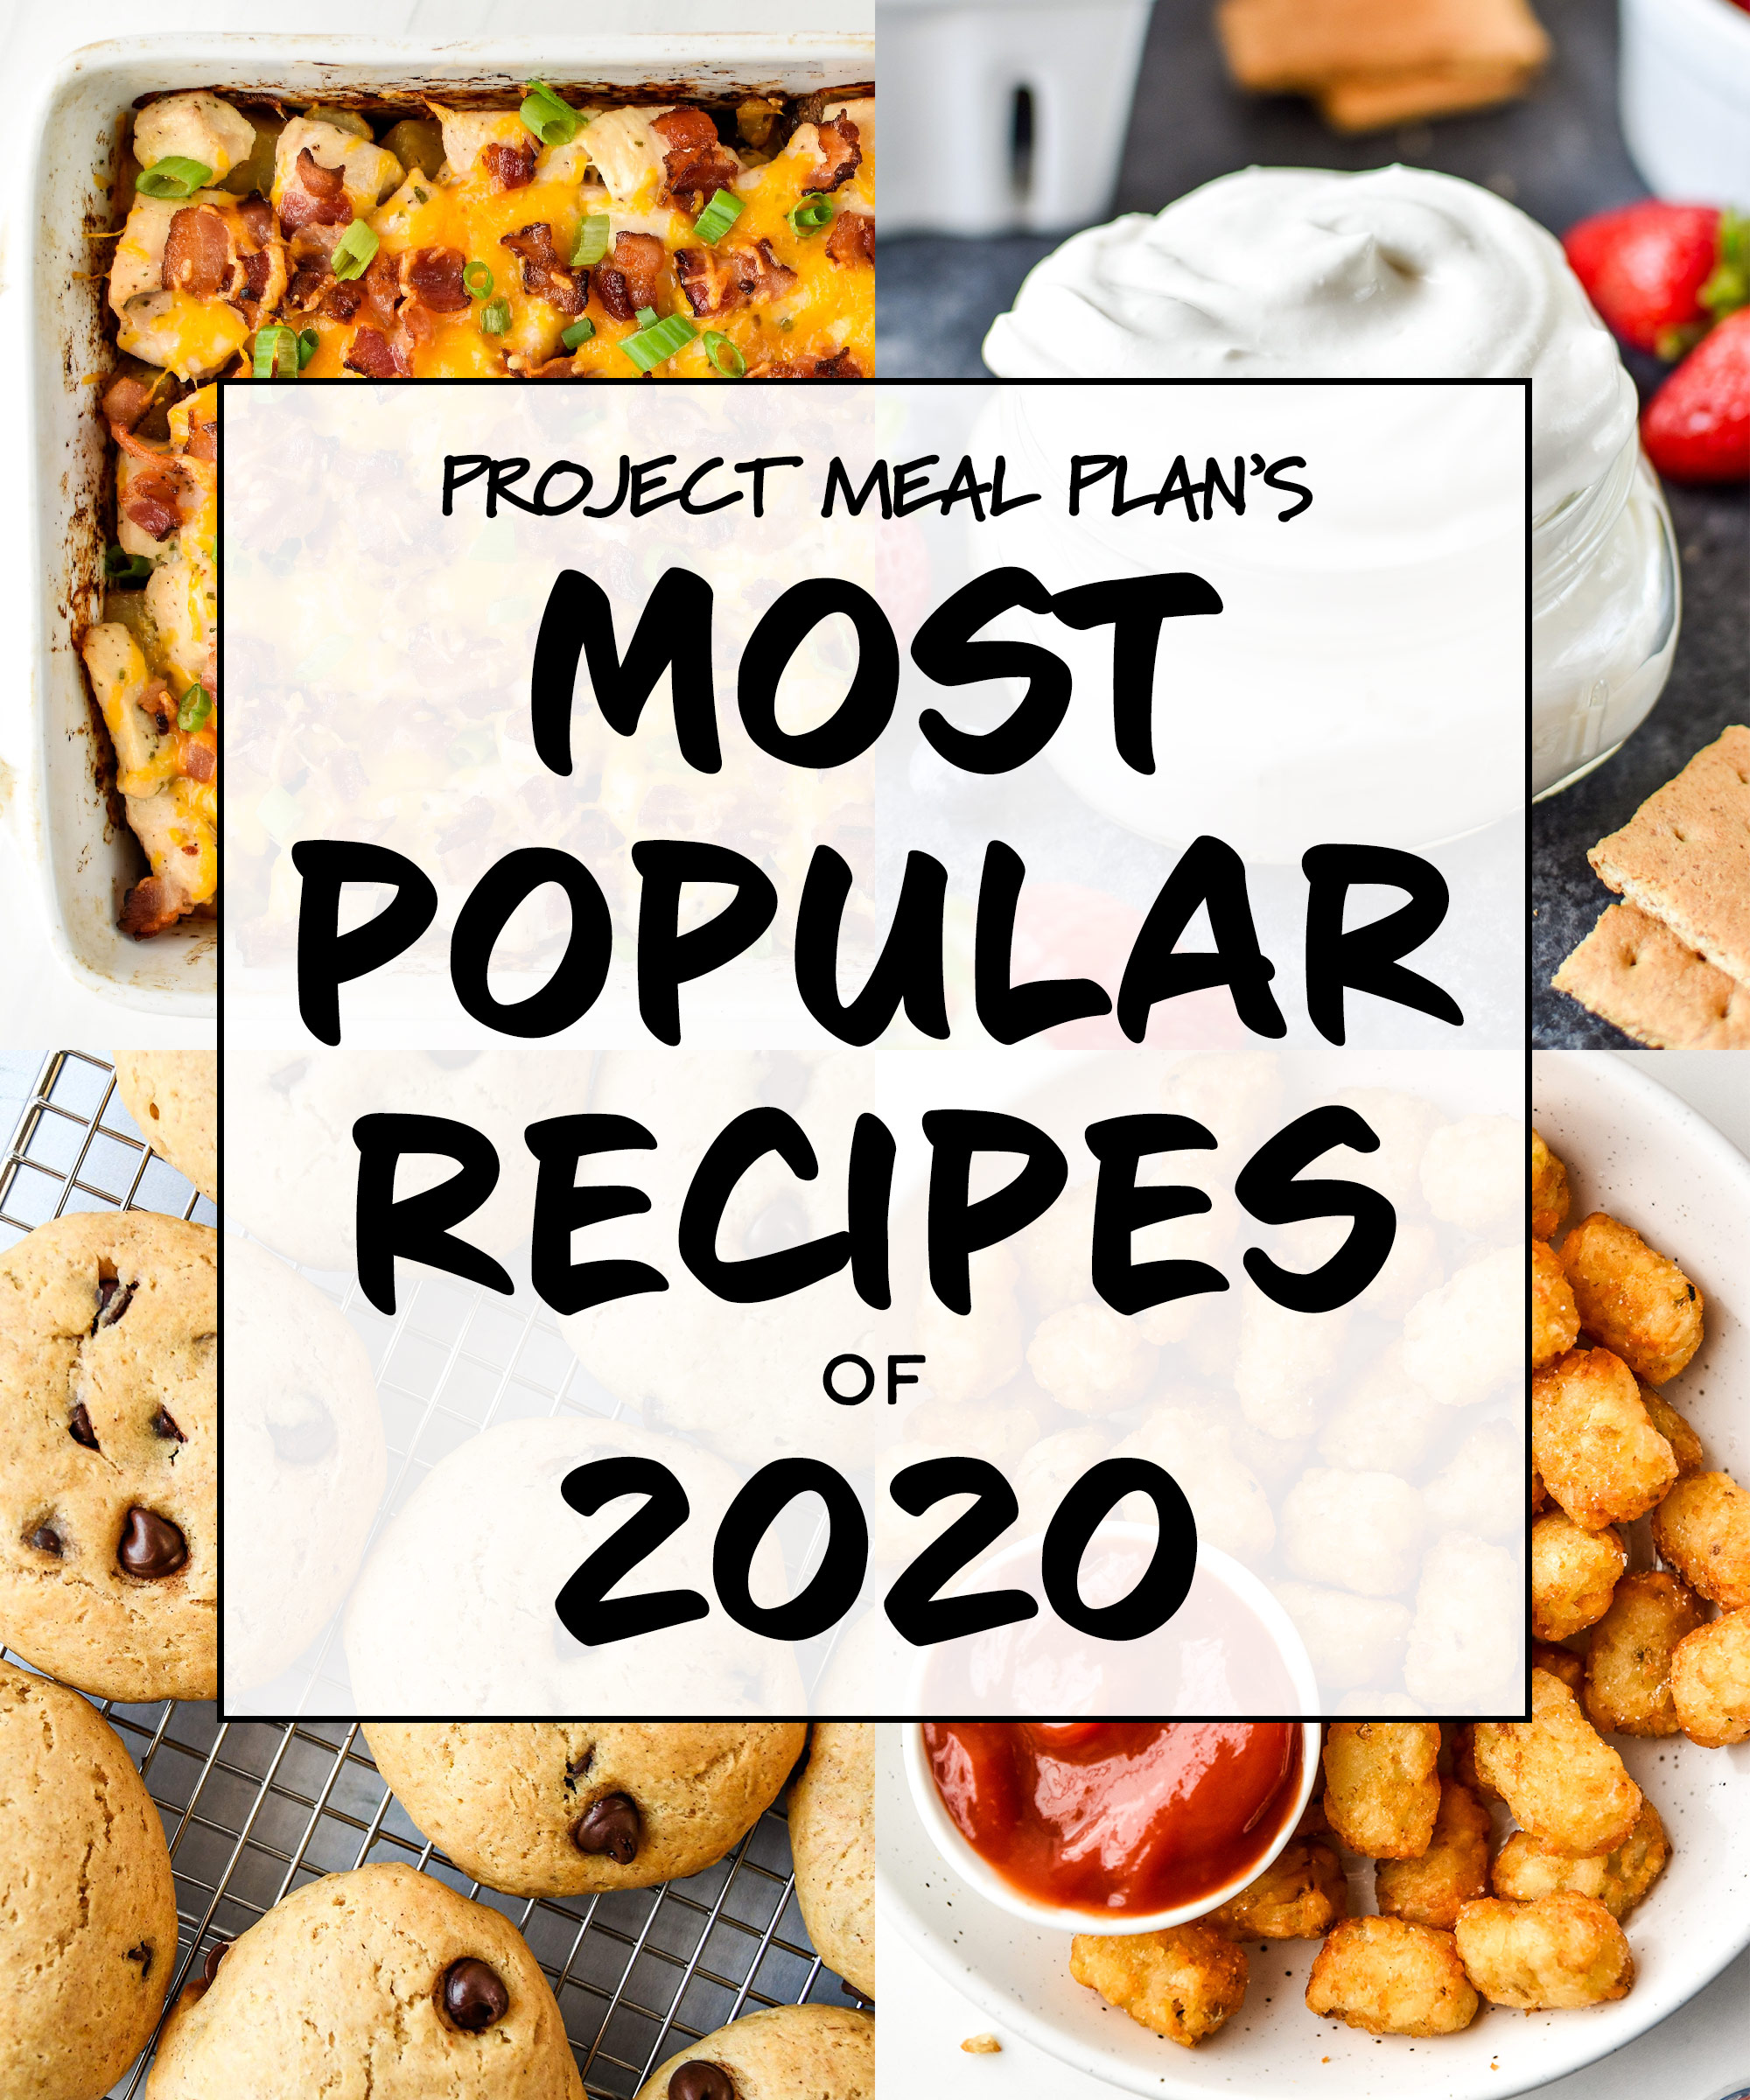 cover photo for article most popular recipes of 2020.